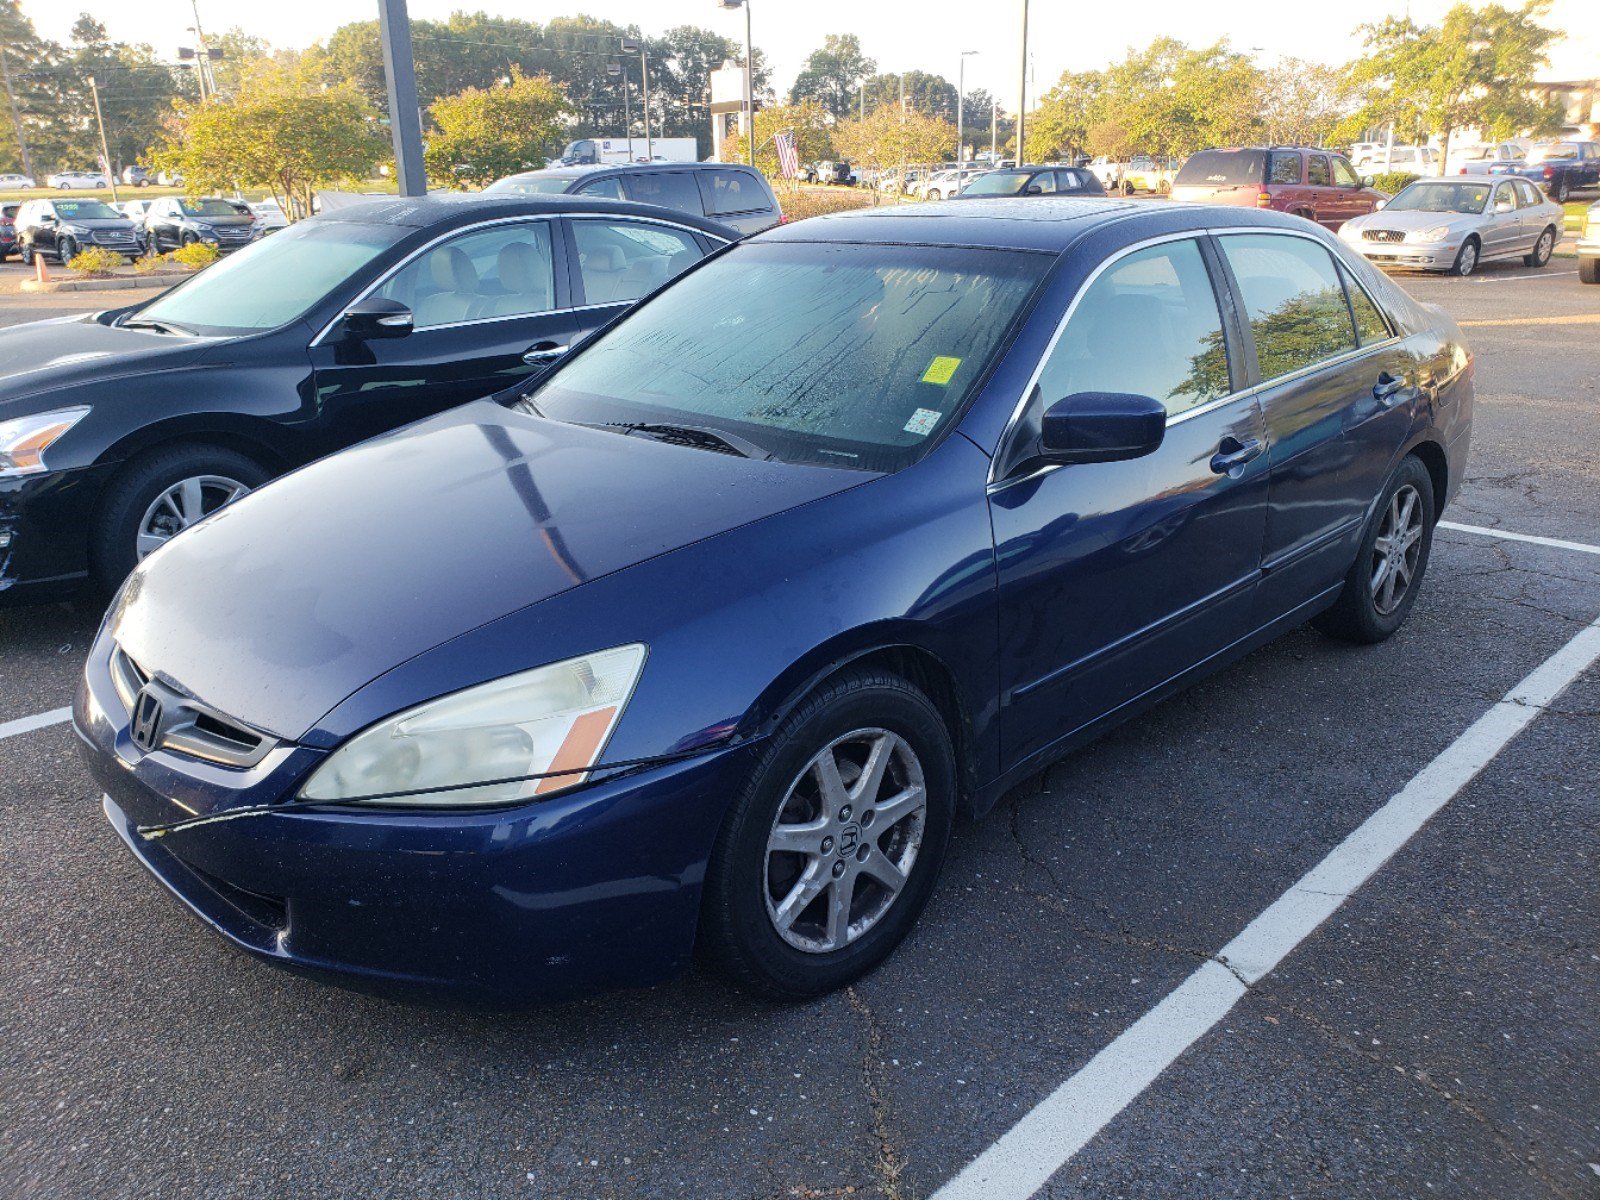 PreOwned 2003 Honda Accord Sdn EX 4dr Car in Jackson, MS